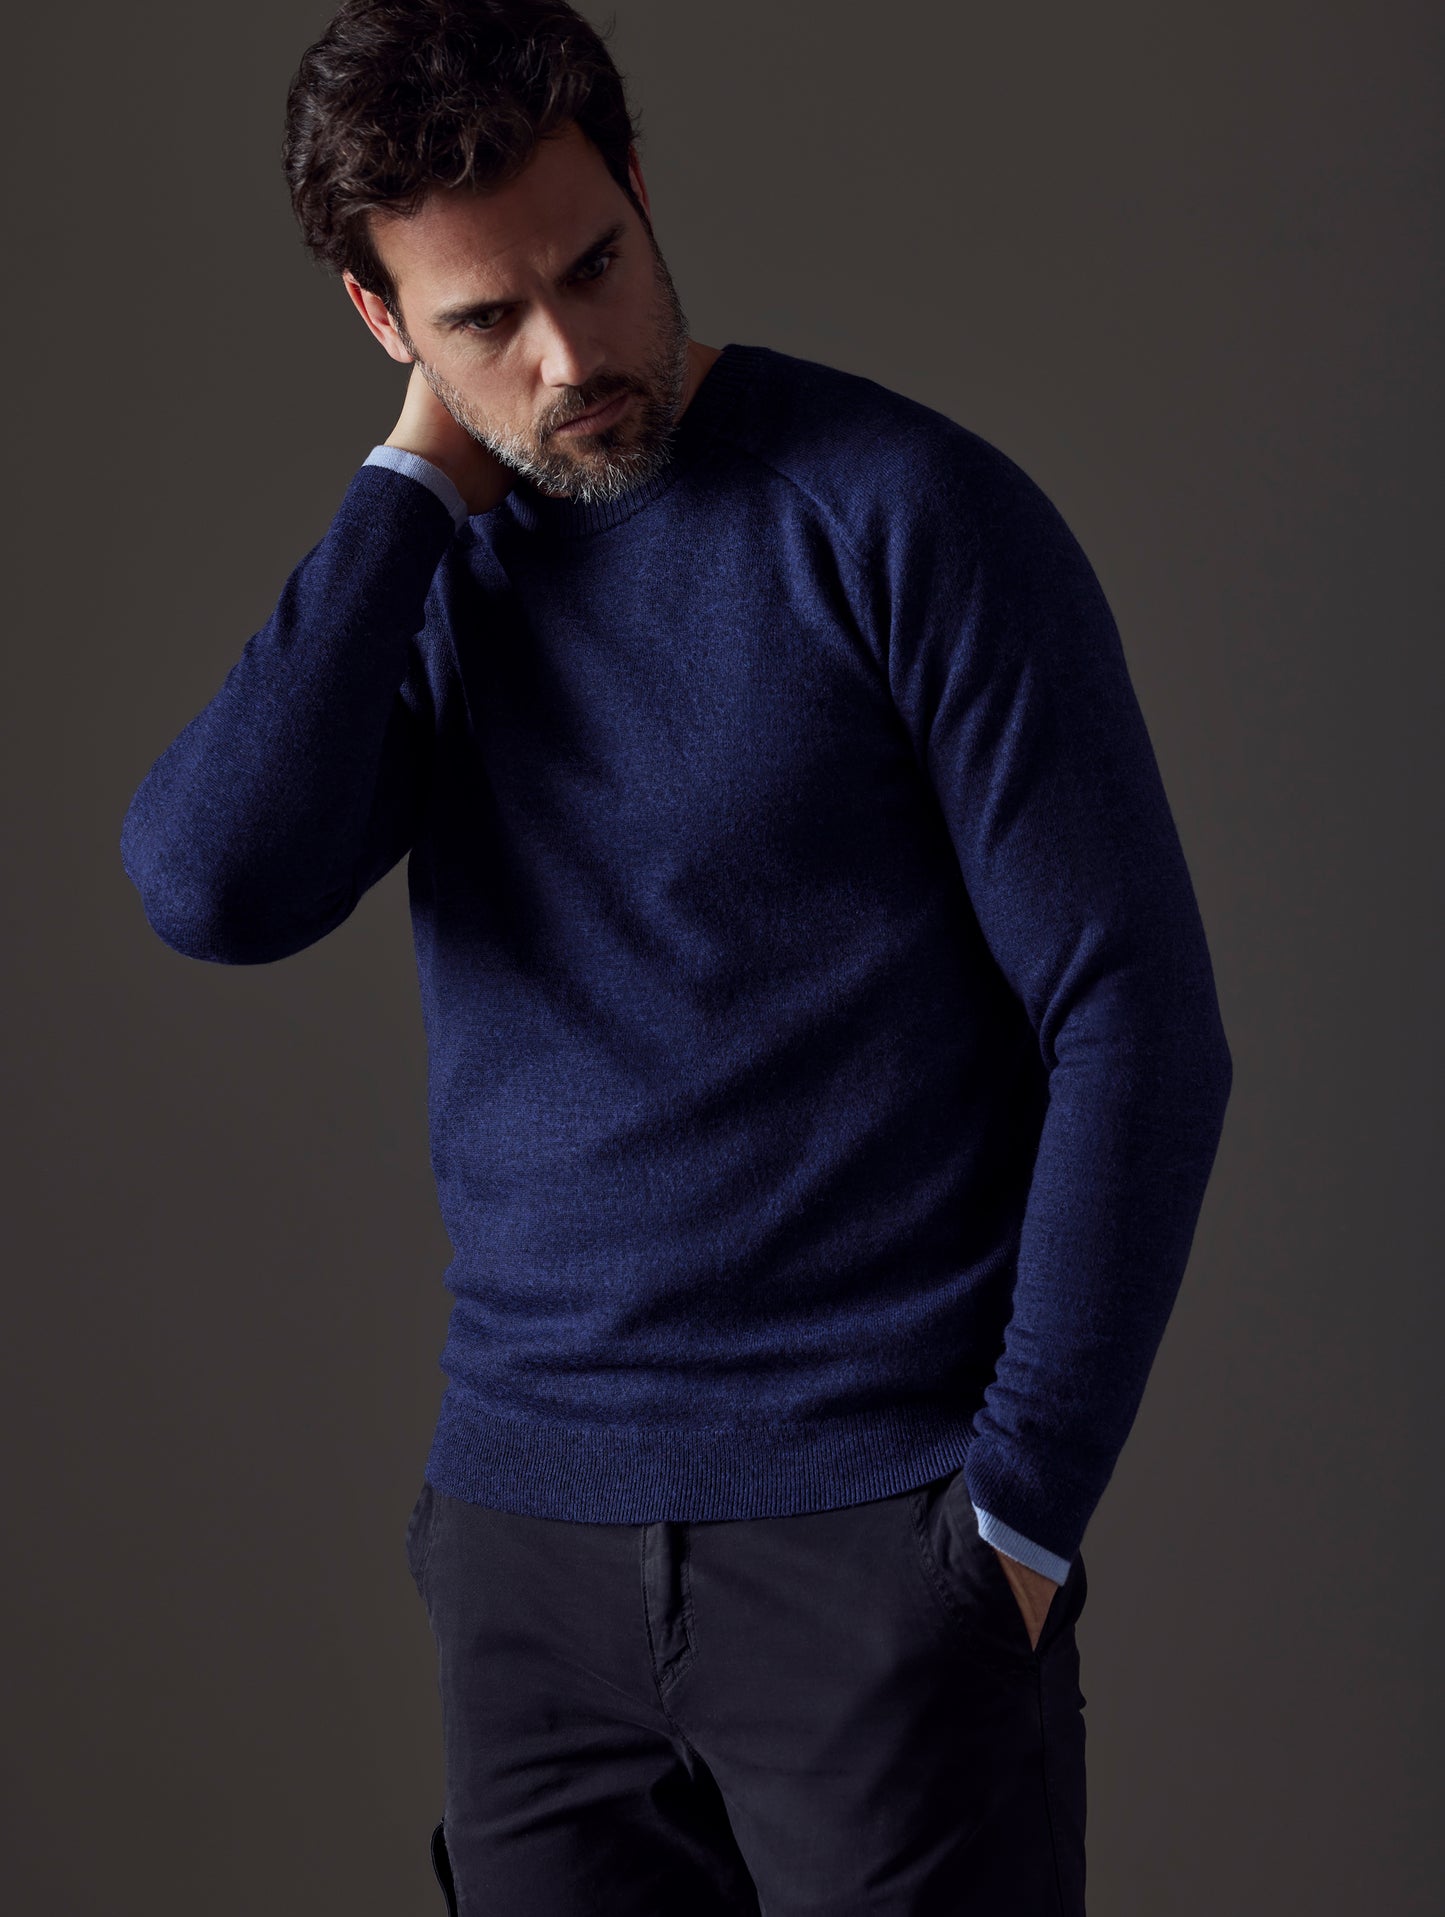 man wearing dark blue sweater from AETHER Apparel